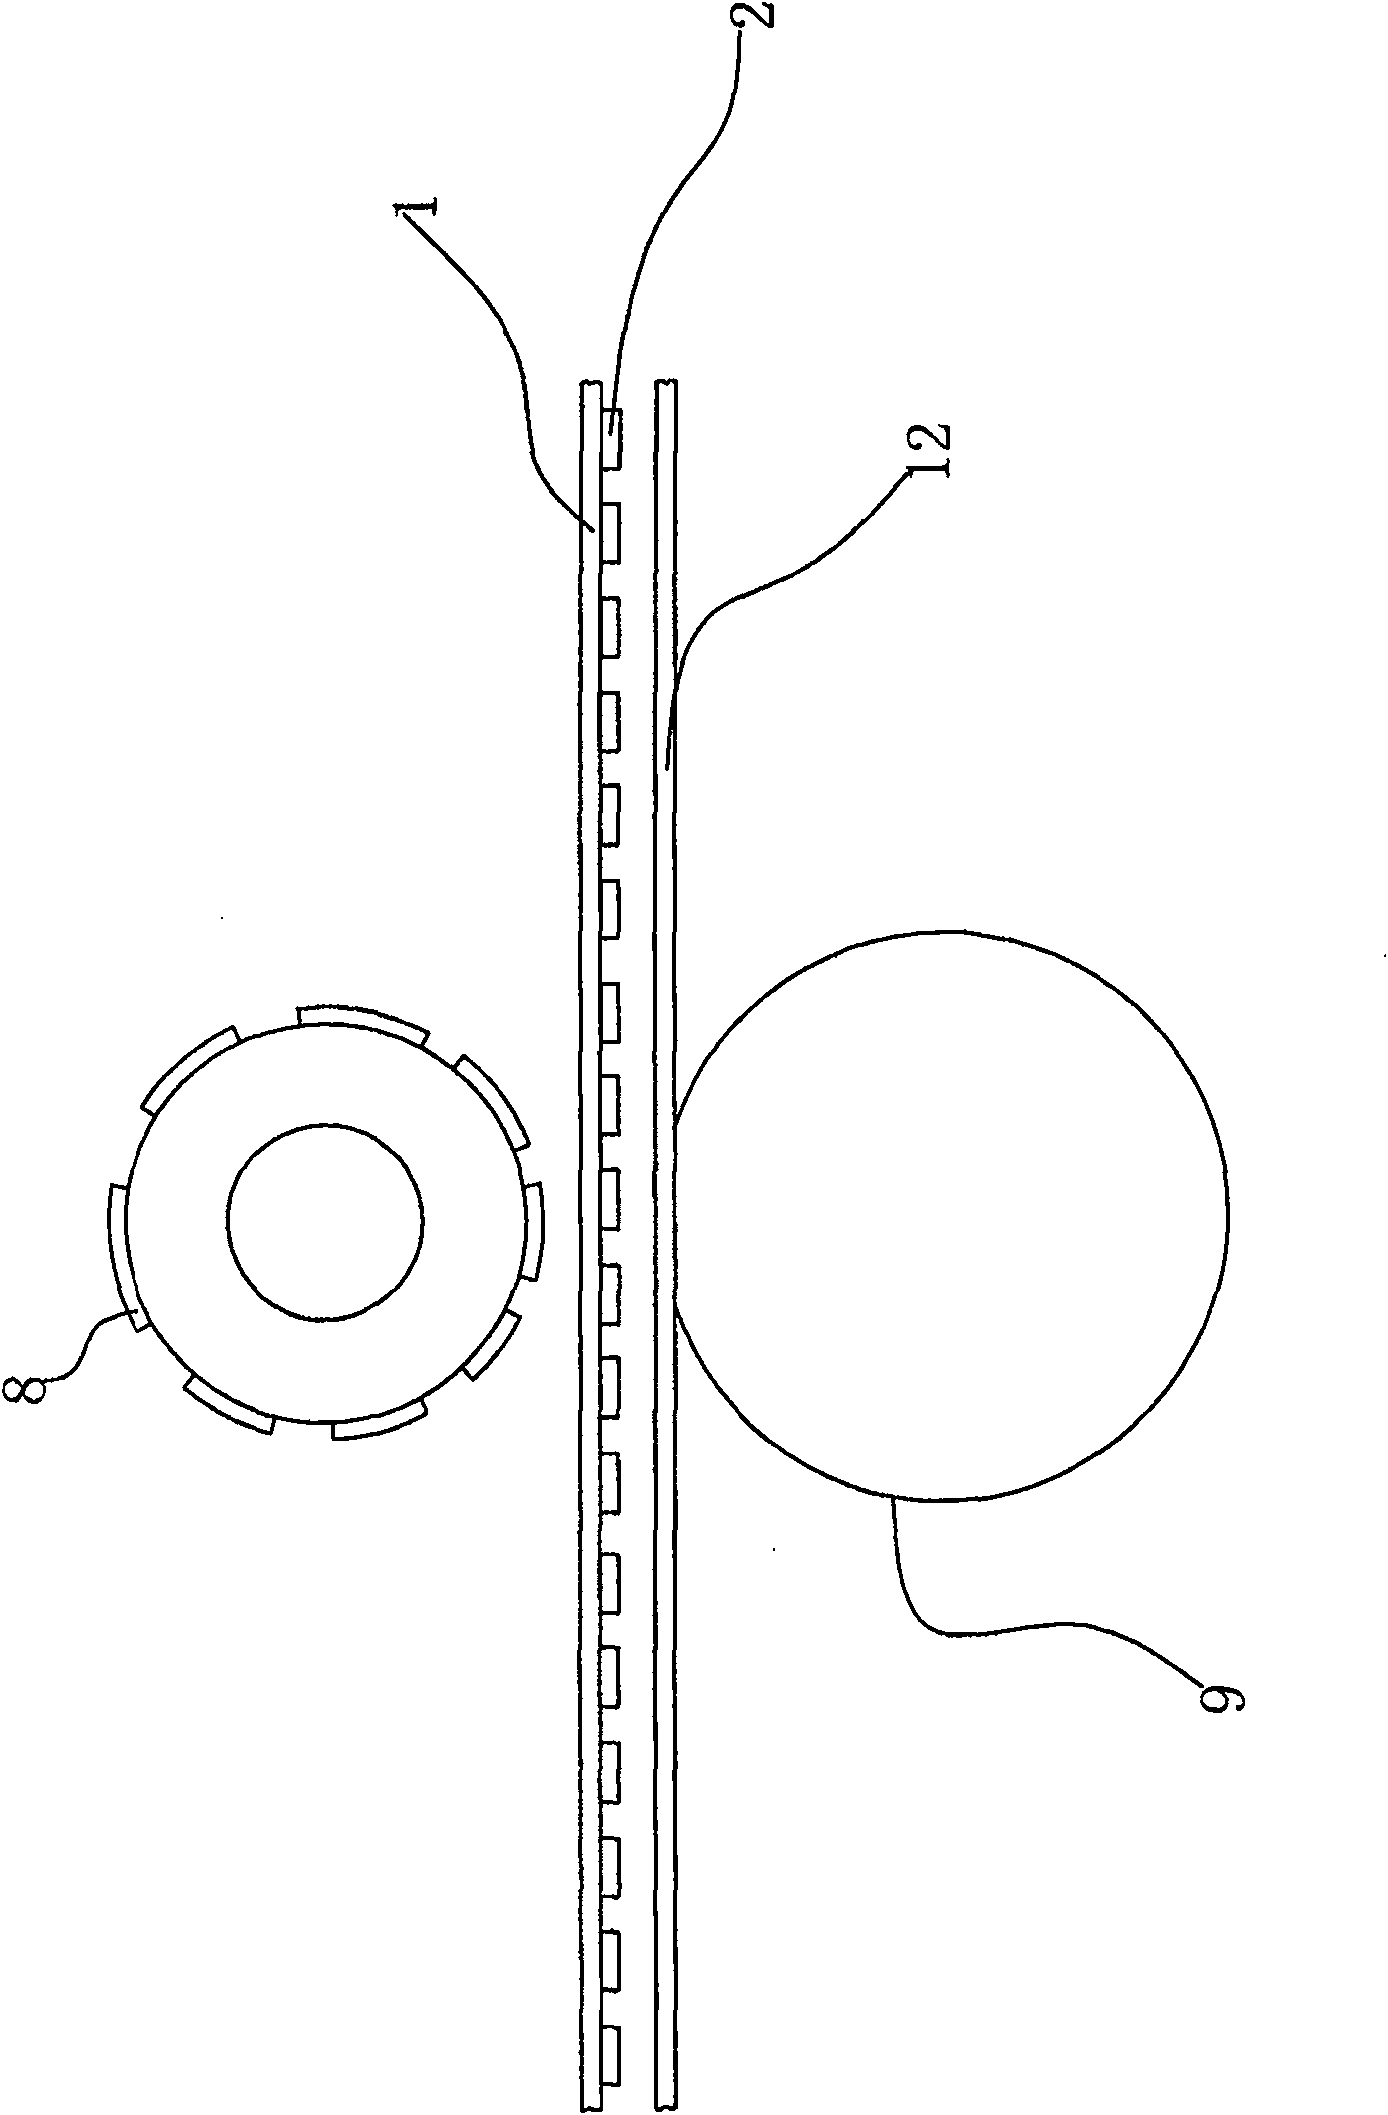 Method for PU transfer printing and embossment one-step shaping for fabric, and device for using the said method